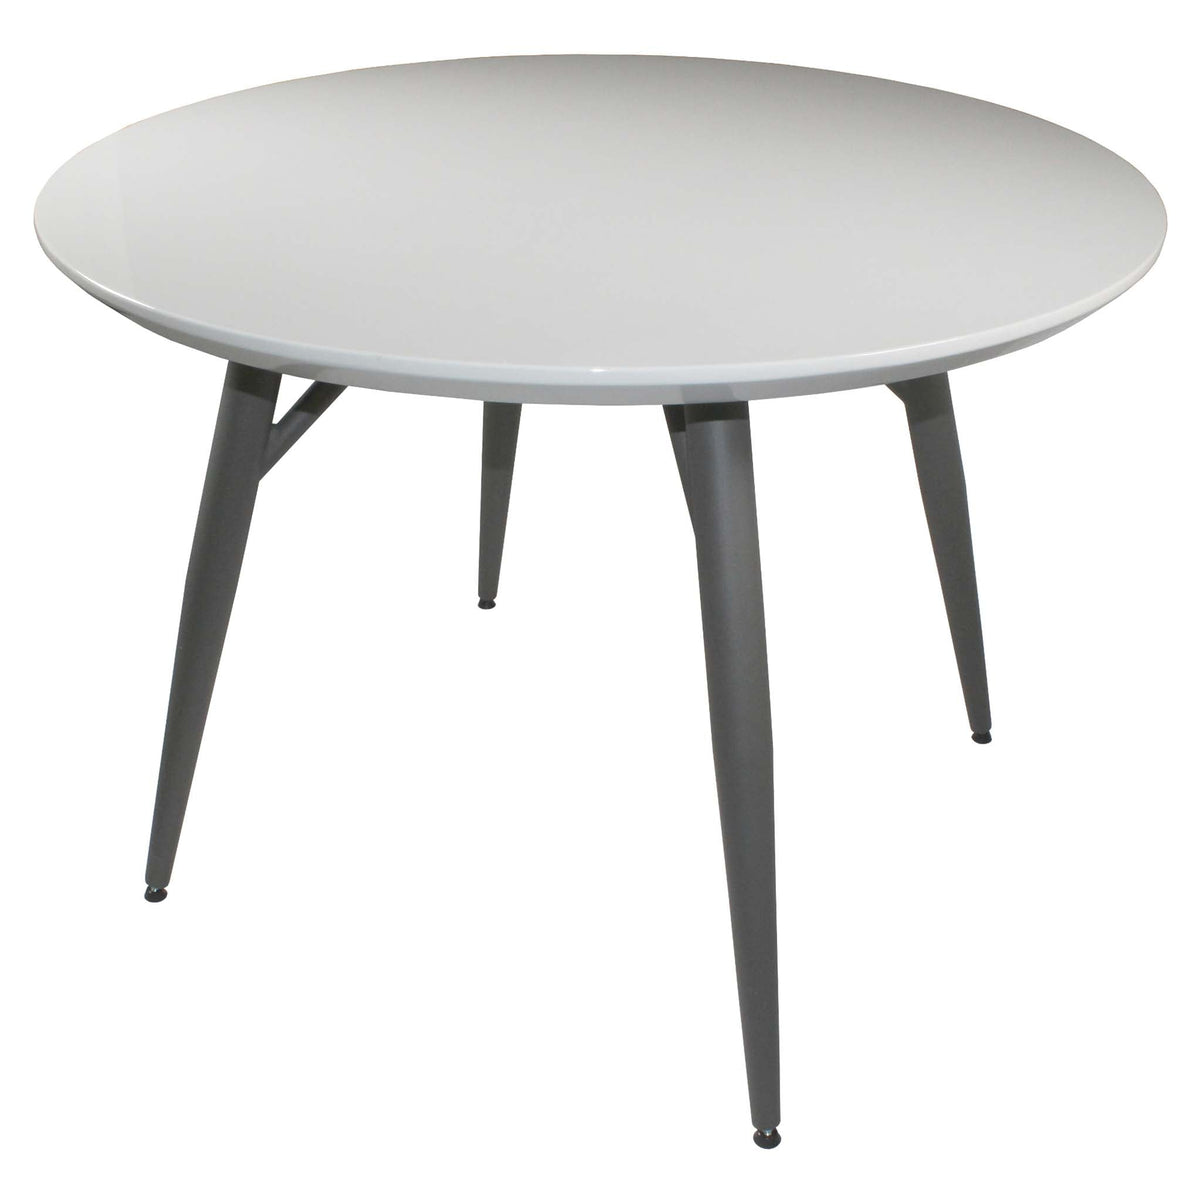 Loma High Gloss Light Grey Dining Table with steel legs